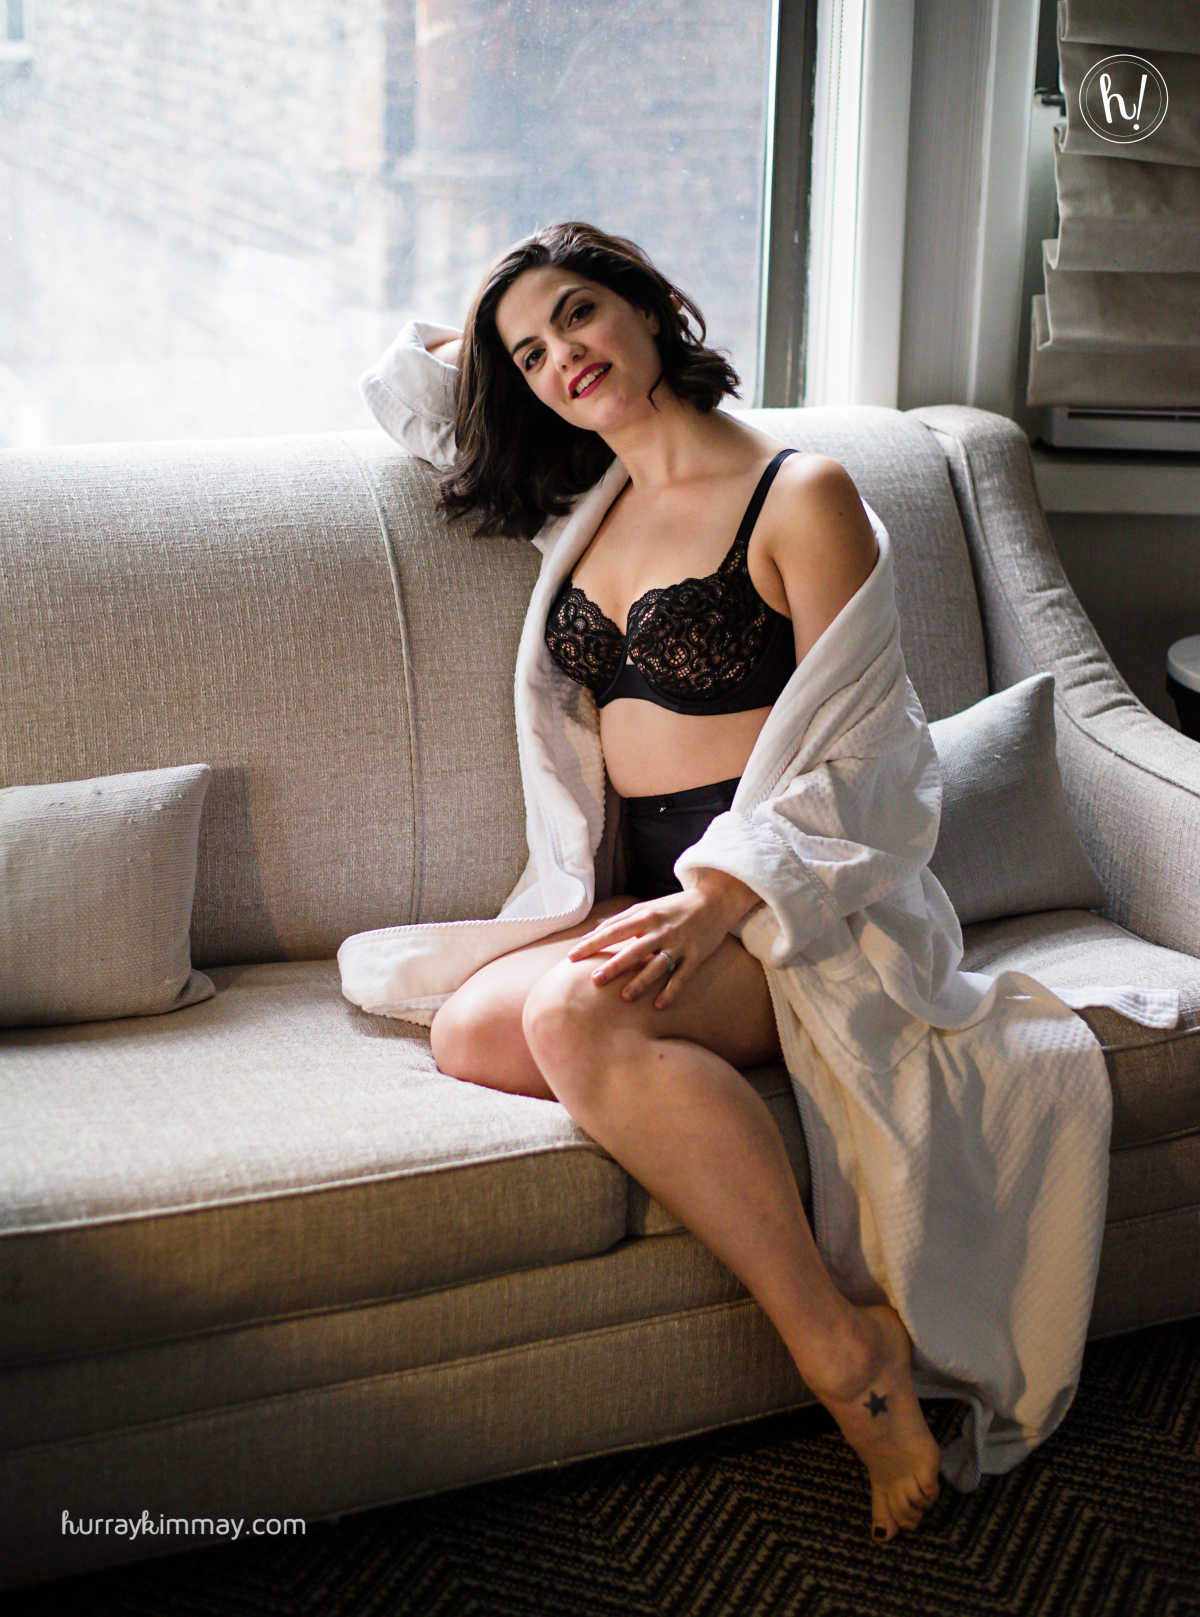 Let Kimmay show you how to make putting on and taking off your bra a self care ritual in this blog!